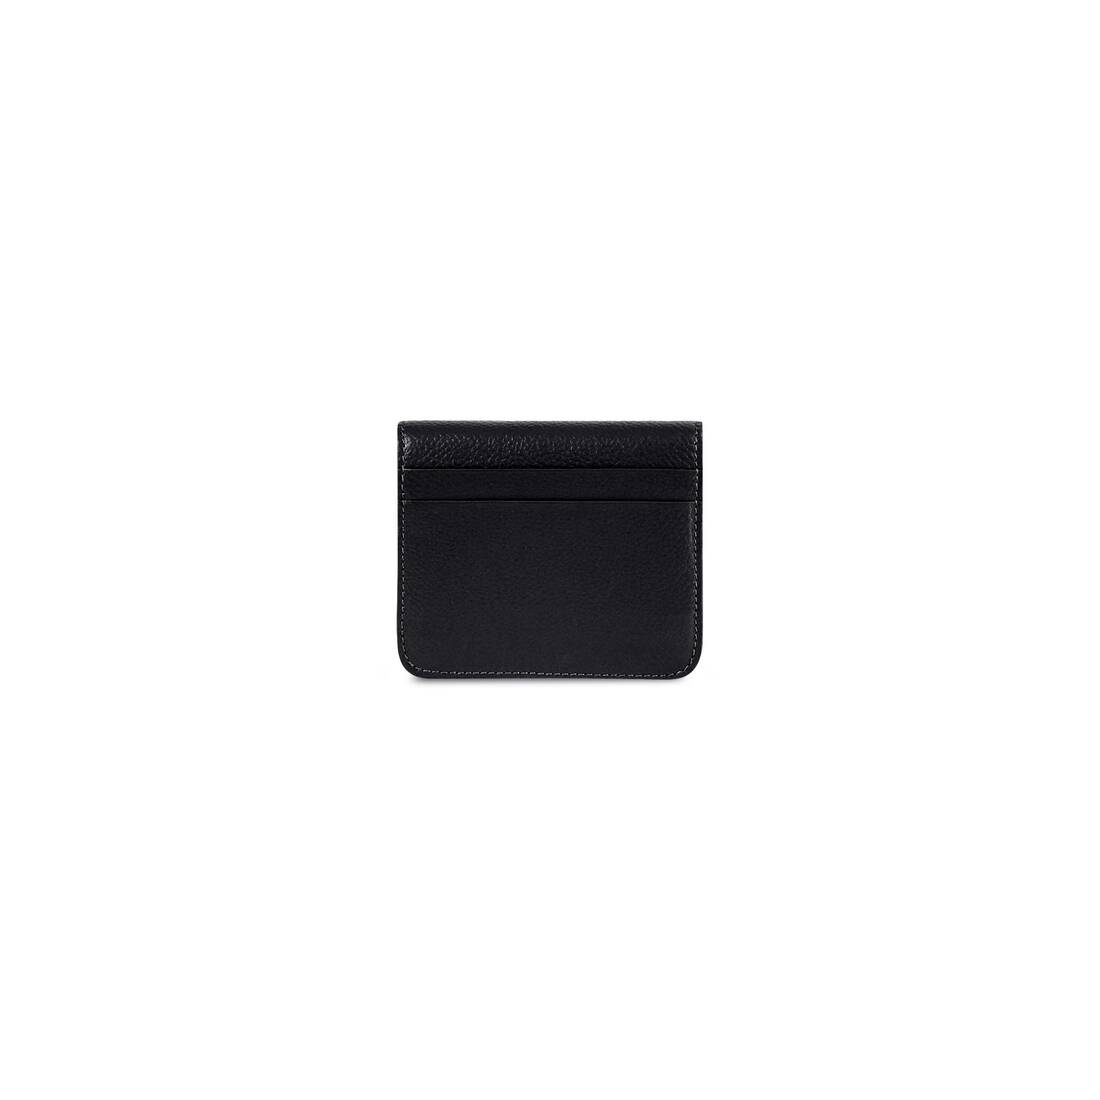 Cash Flap Coin And Card Holder in Black - 2